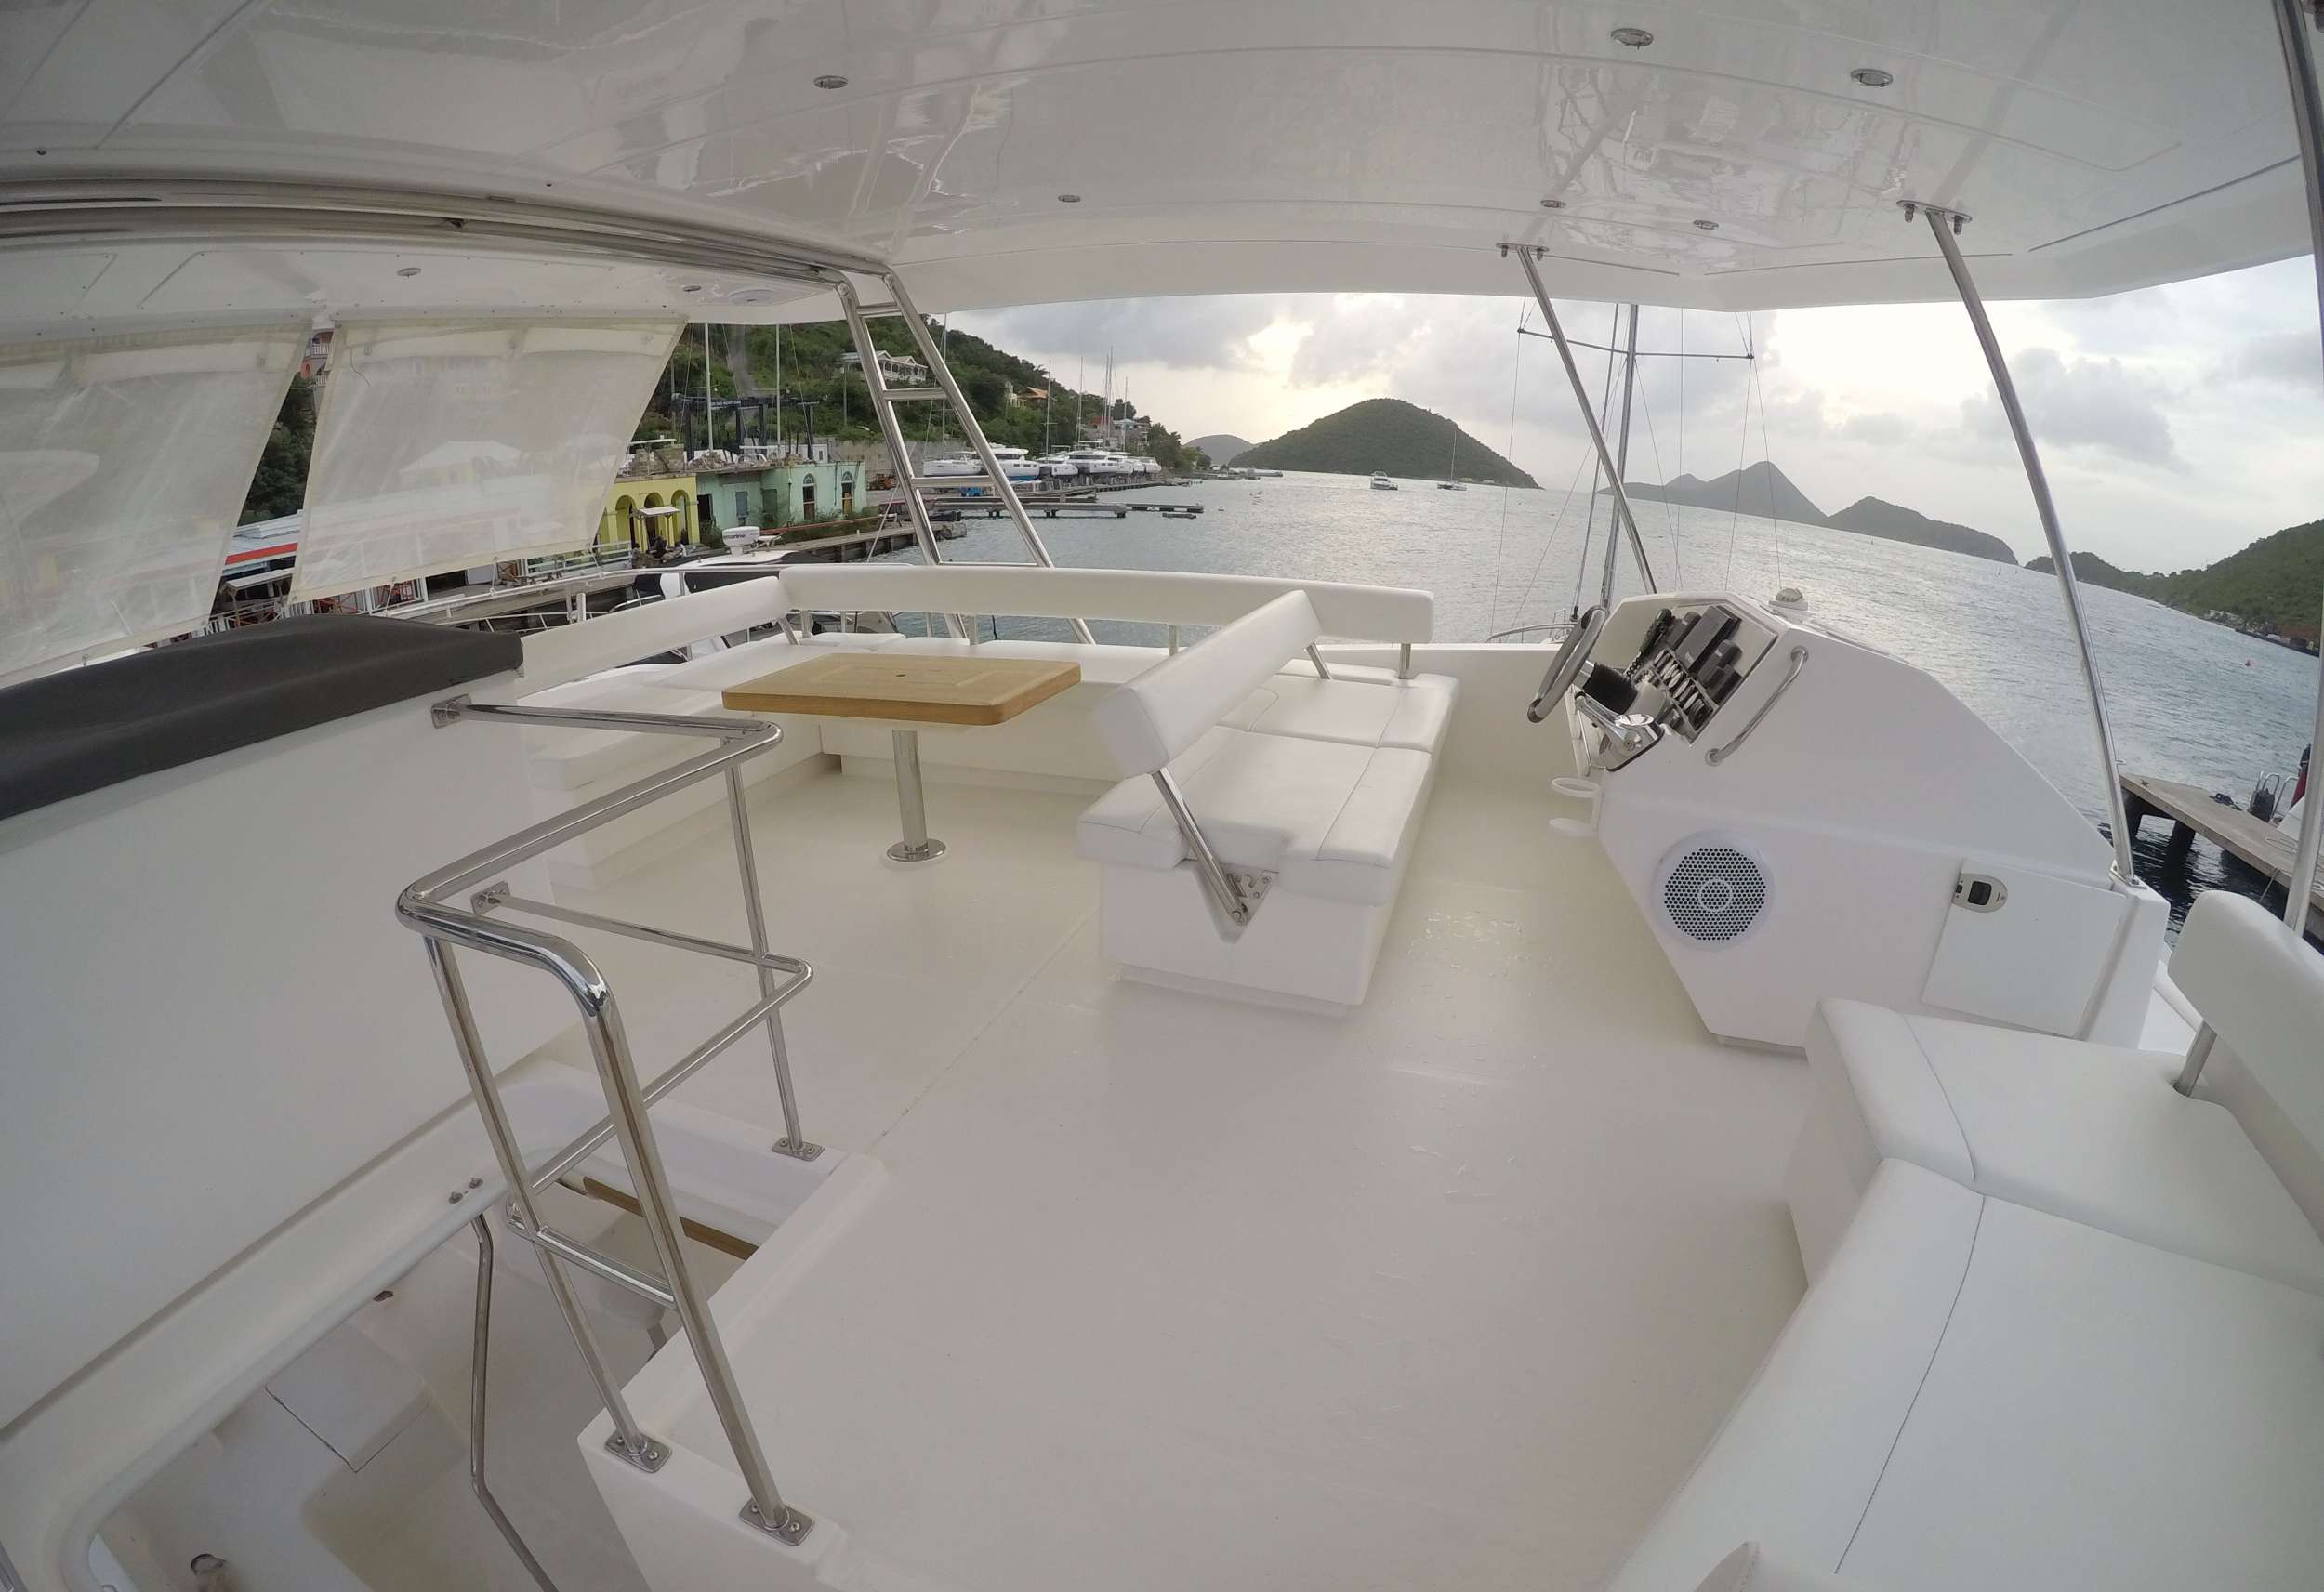 SOMEWHERE HOT Yacht Charter - Flybridge and helm station